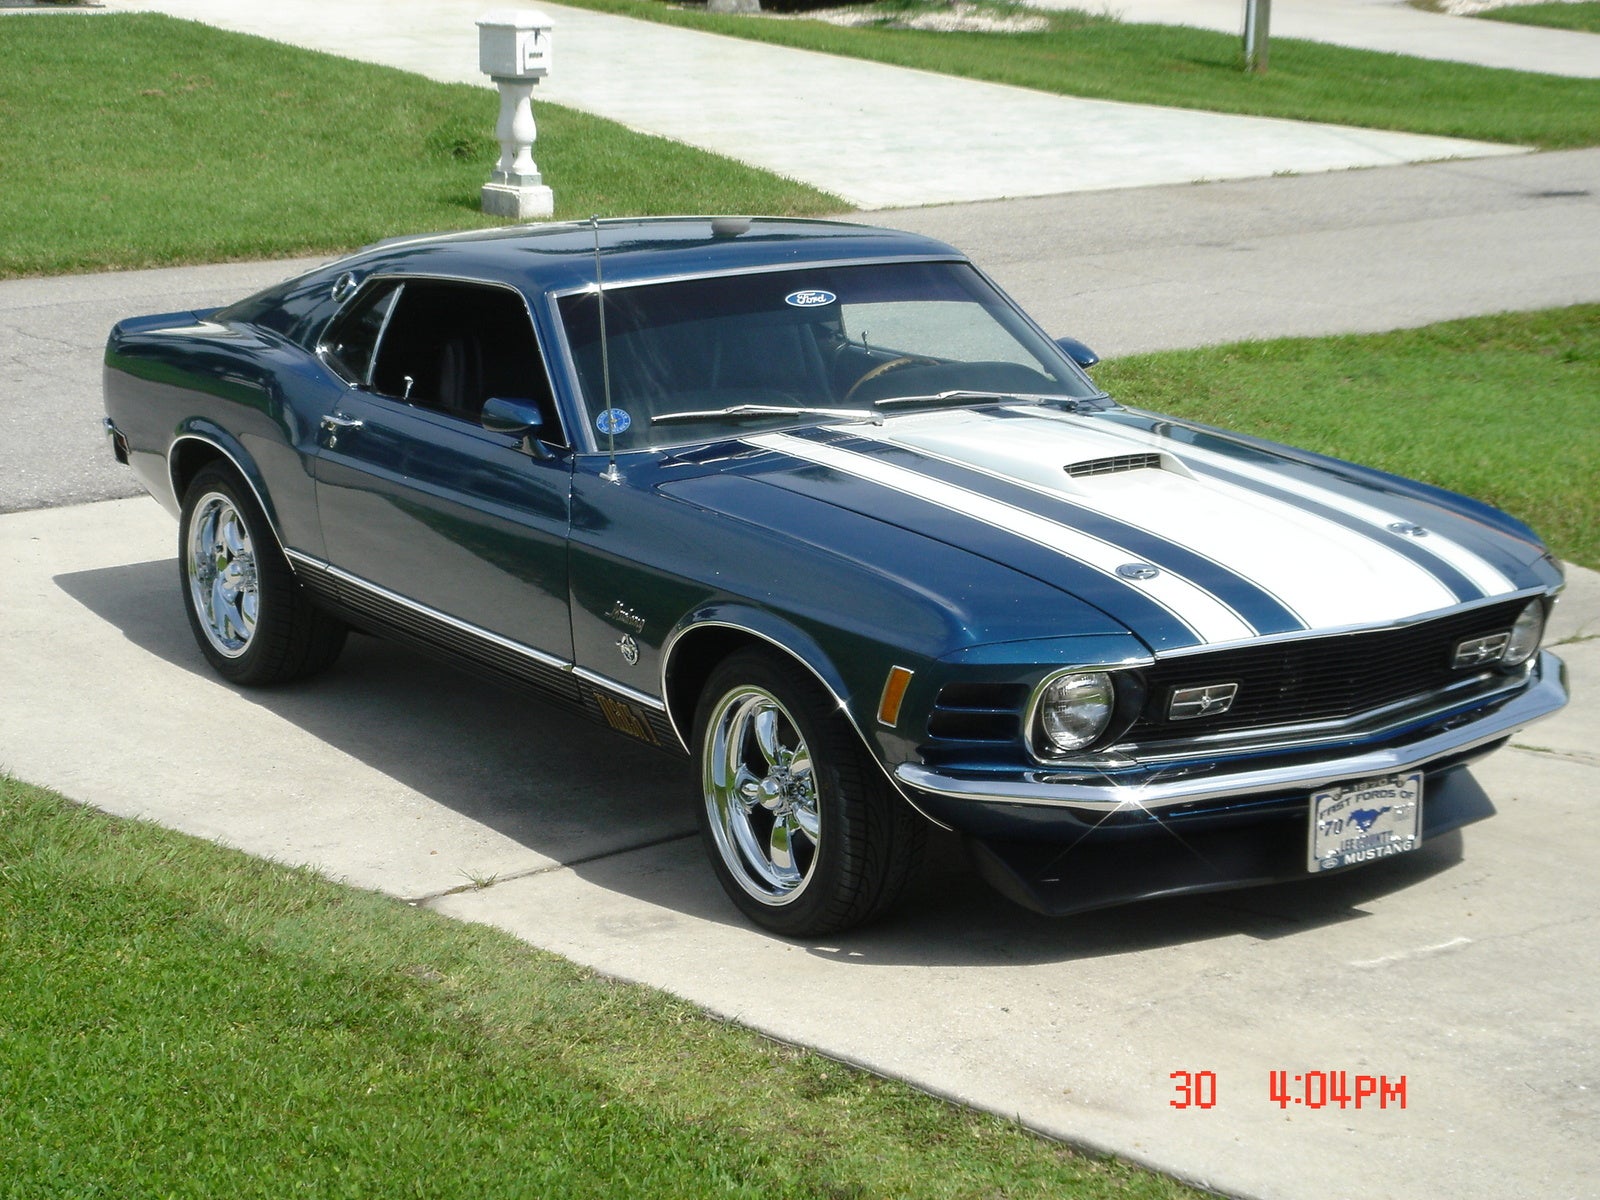 1970 Ford mustang mach 1 sale texas